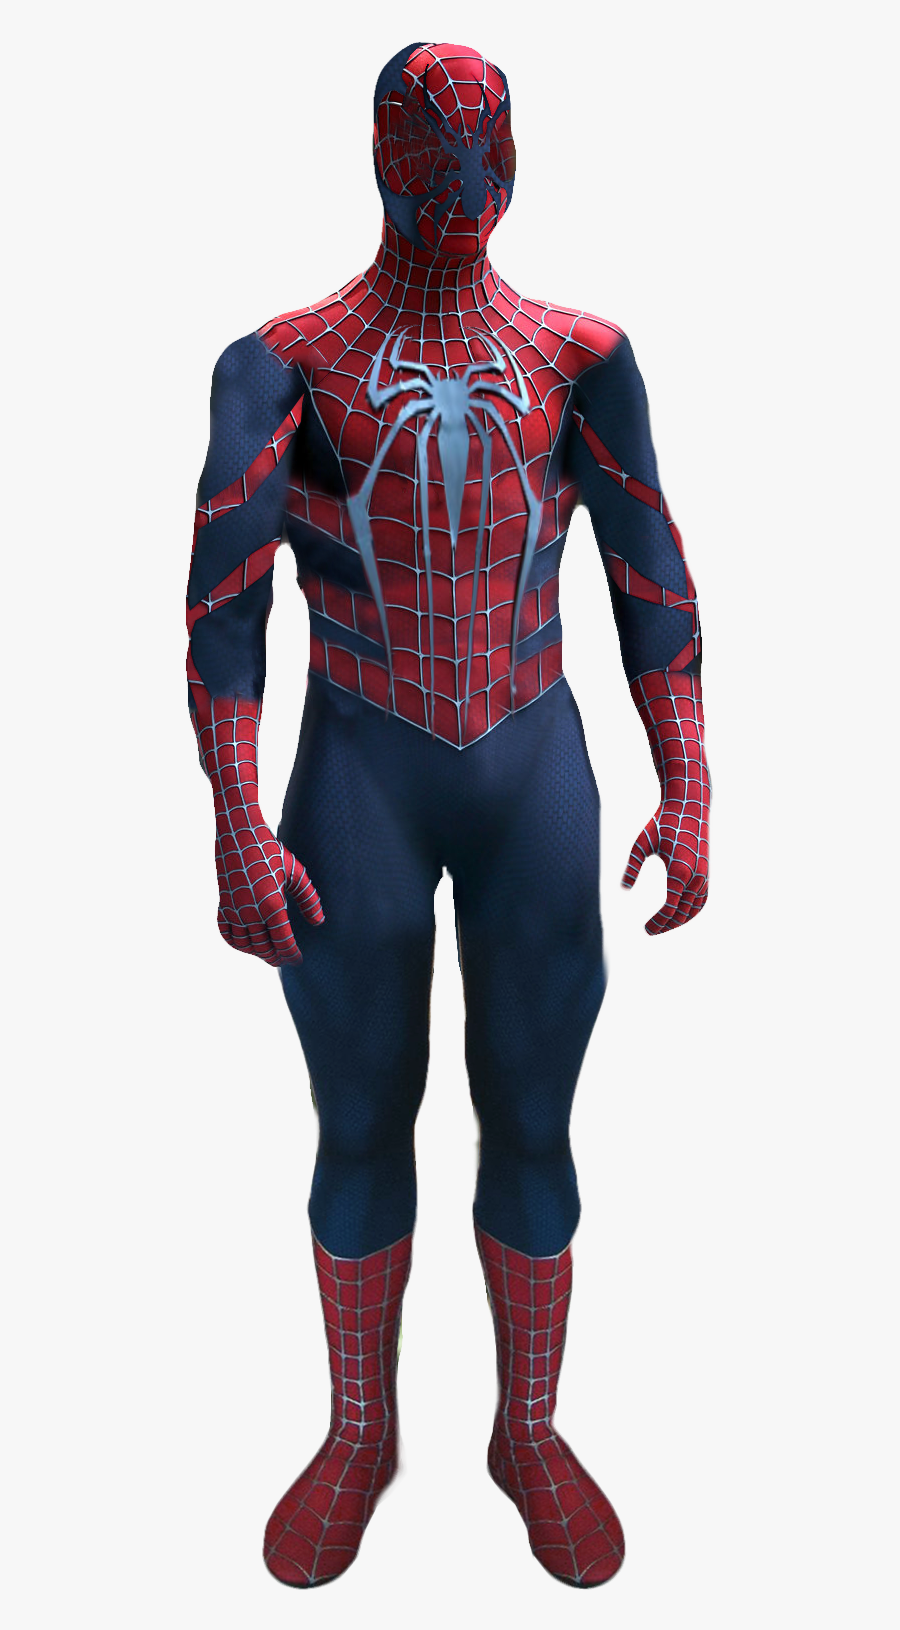 Spider Man Costume Fan Art - Drawing Of The Amazing Spider Man, Transparent Clipart